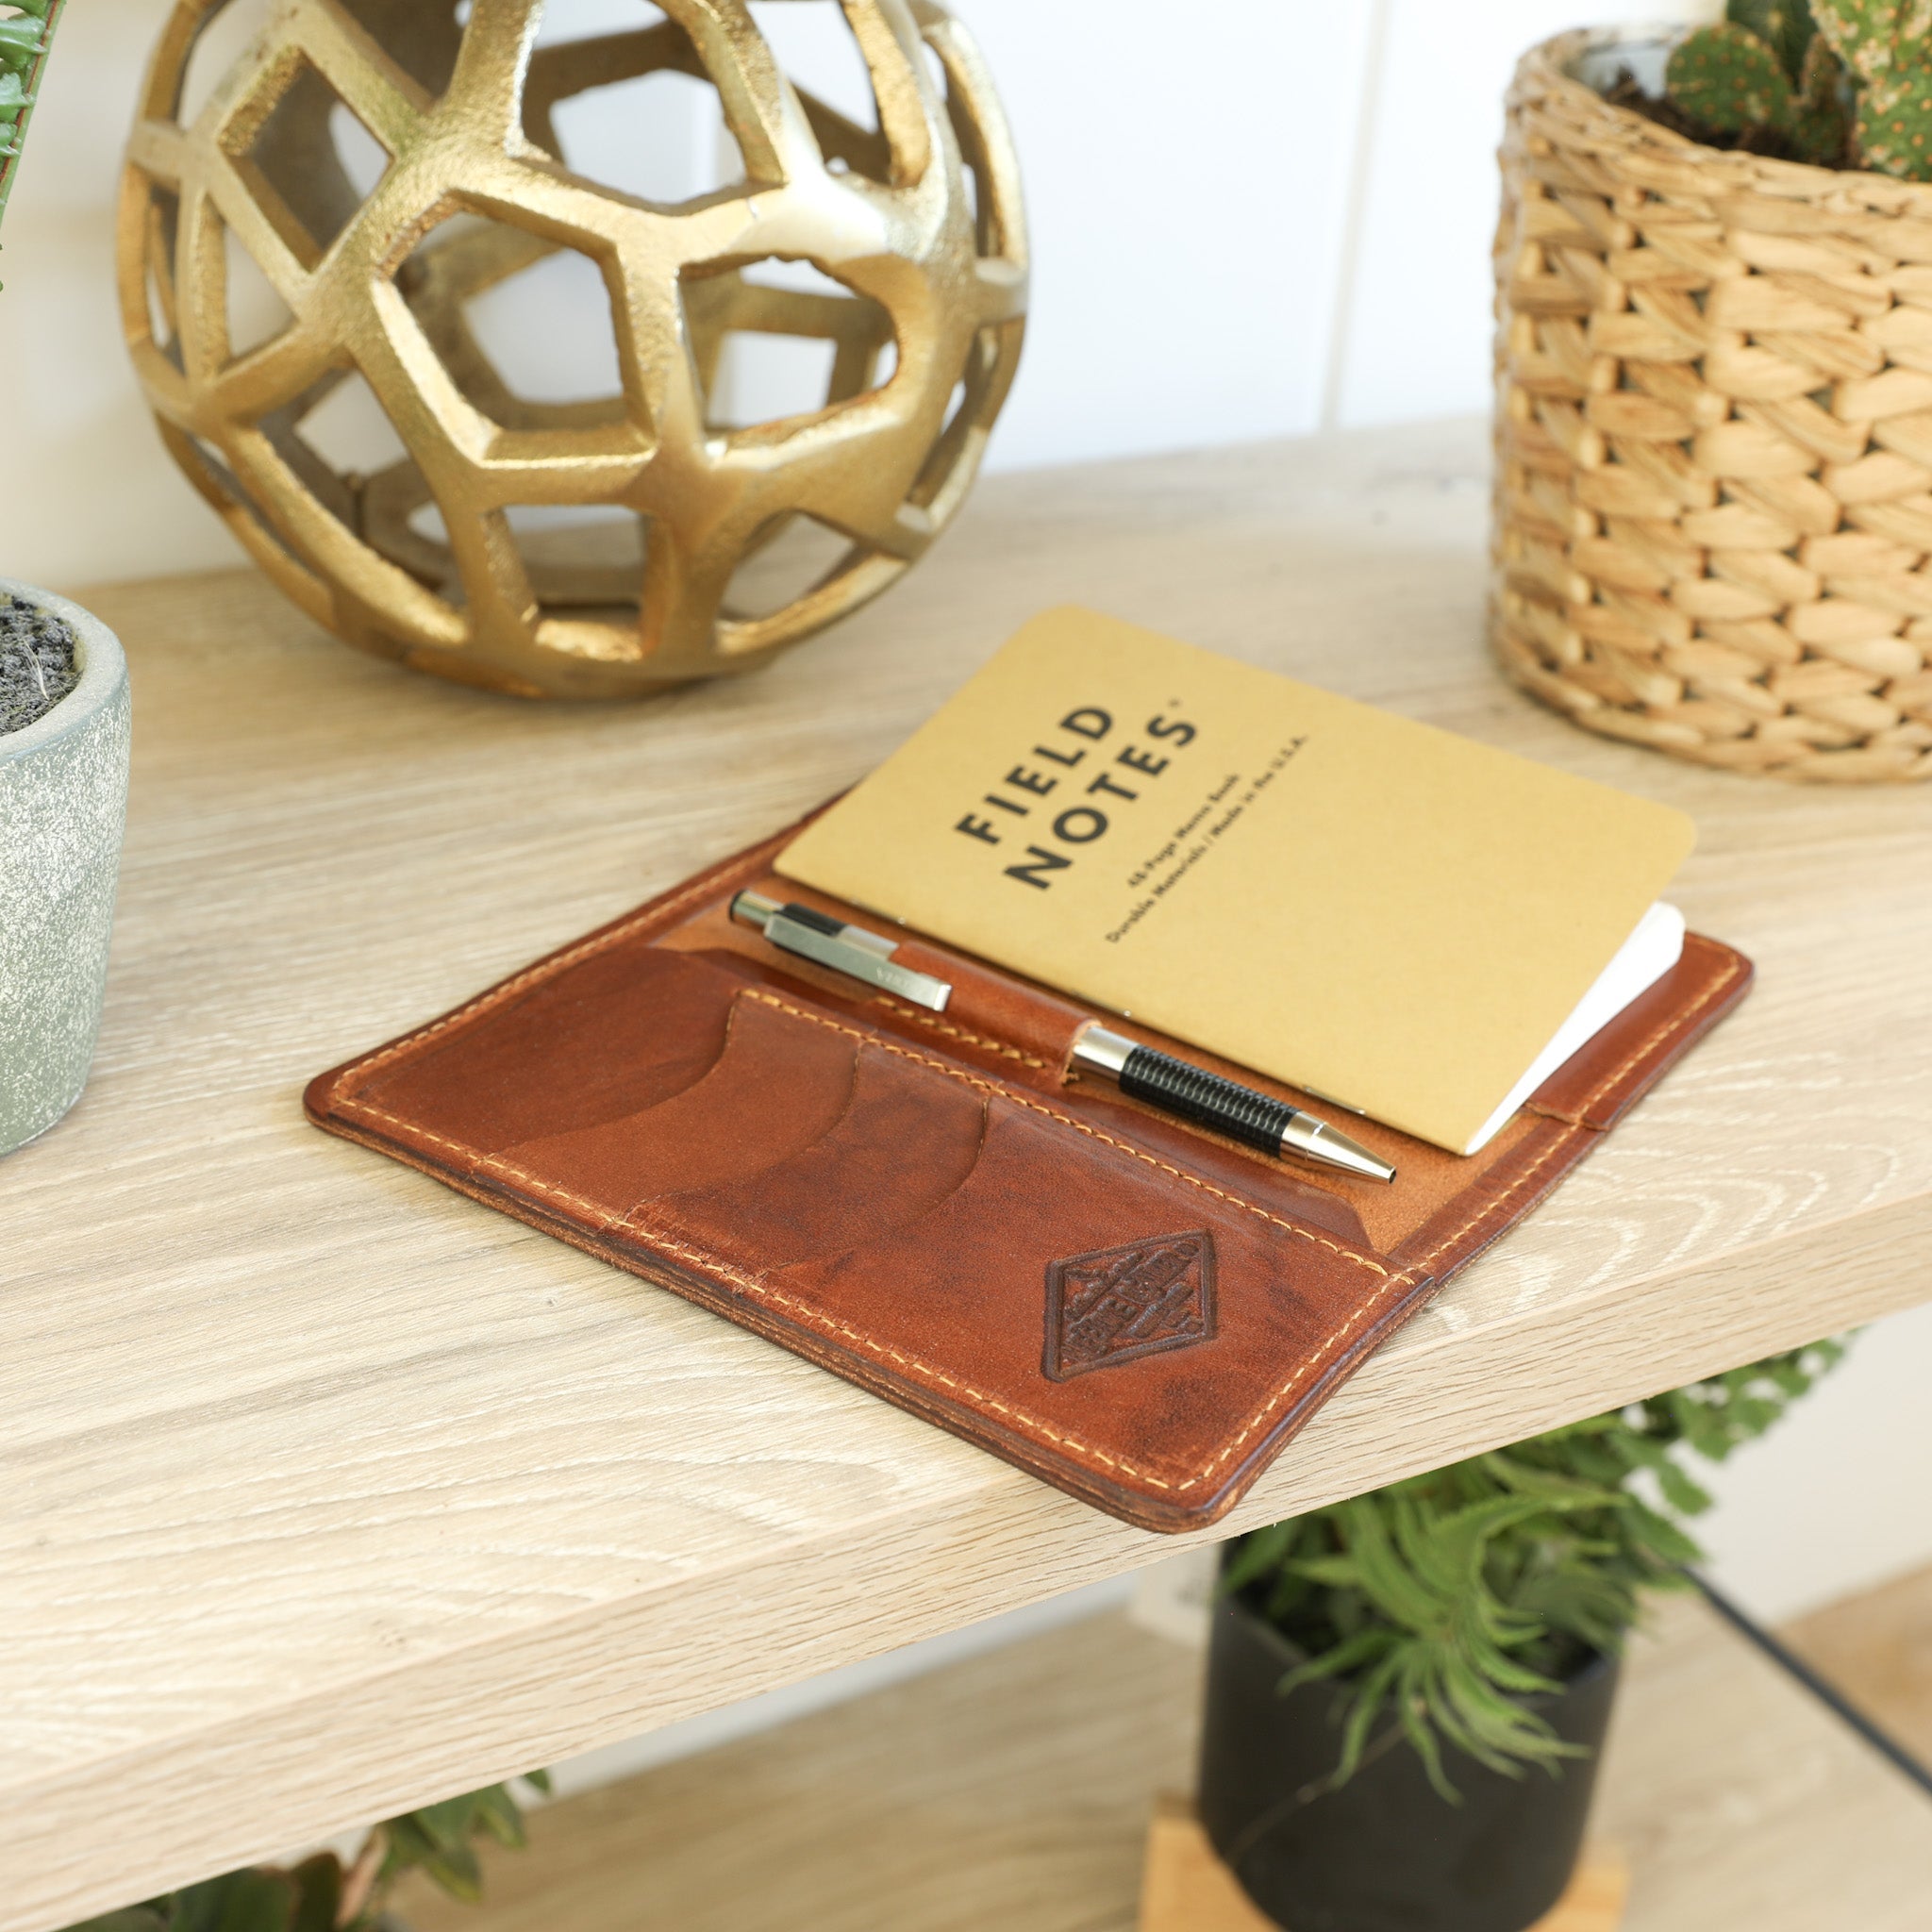 Field Notes Wallet by Lifetime Leather Co